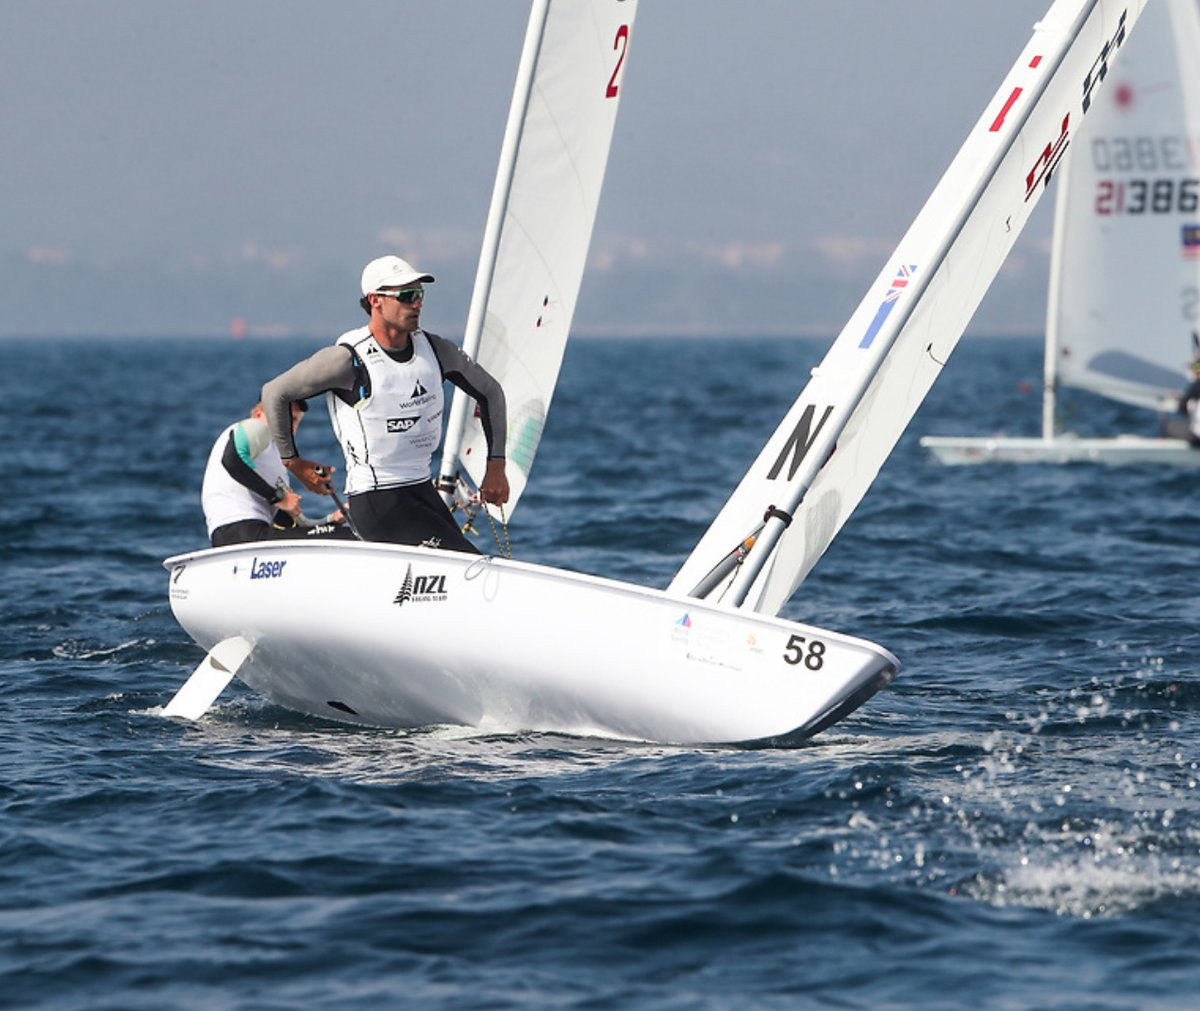 Sam Meech was among the winners today in the laser class ©World Sailing